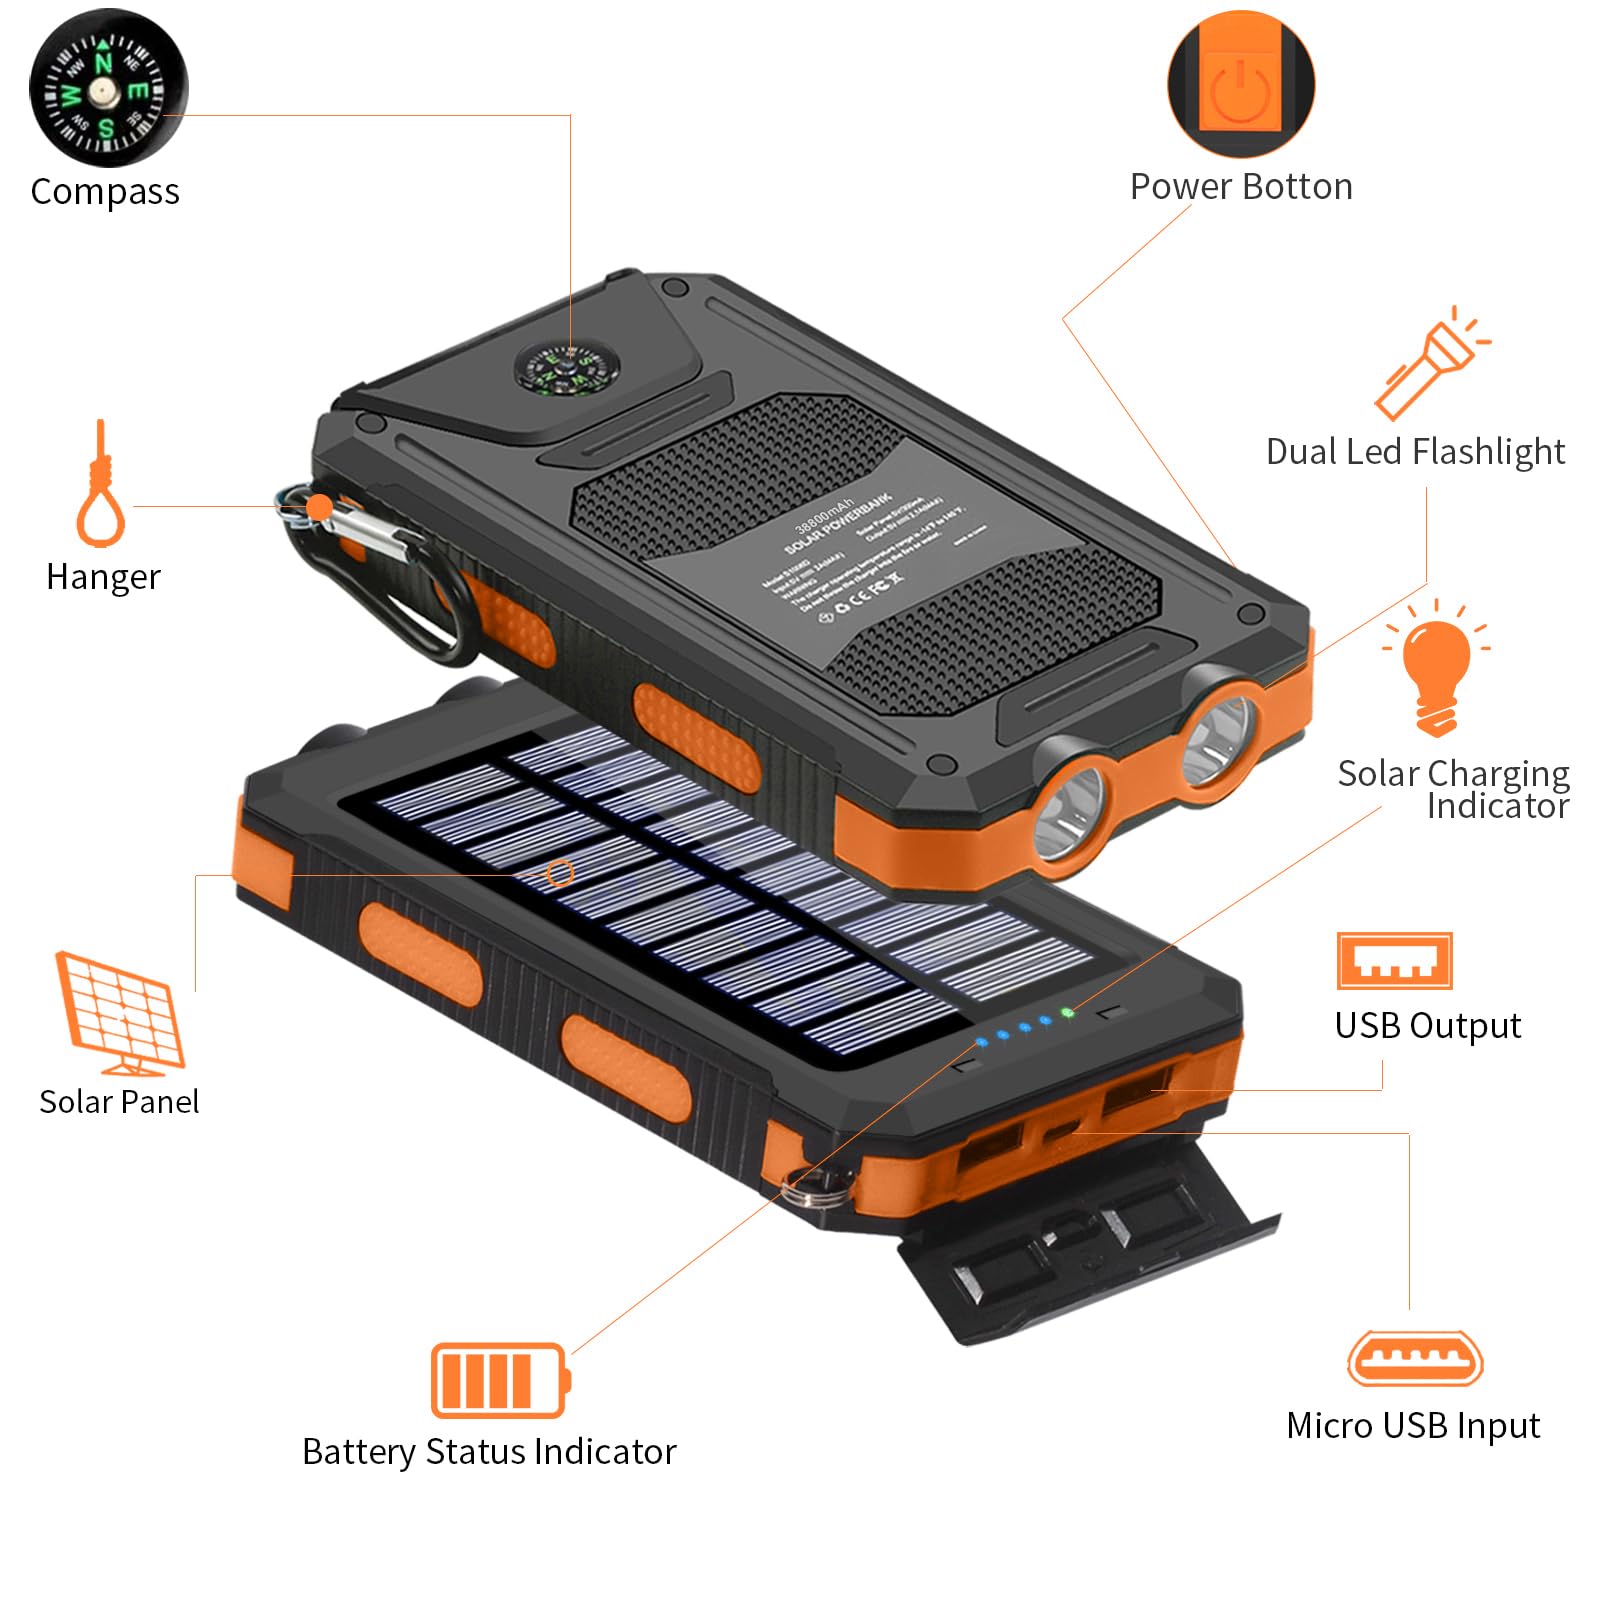 Saraupup Solar Charger Power Bank, 38800mAh Portable Charger Fast Charger Dual USB Port Built-in Led Flashlight and Compass for All Cell Phone and Electronic Devices